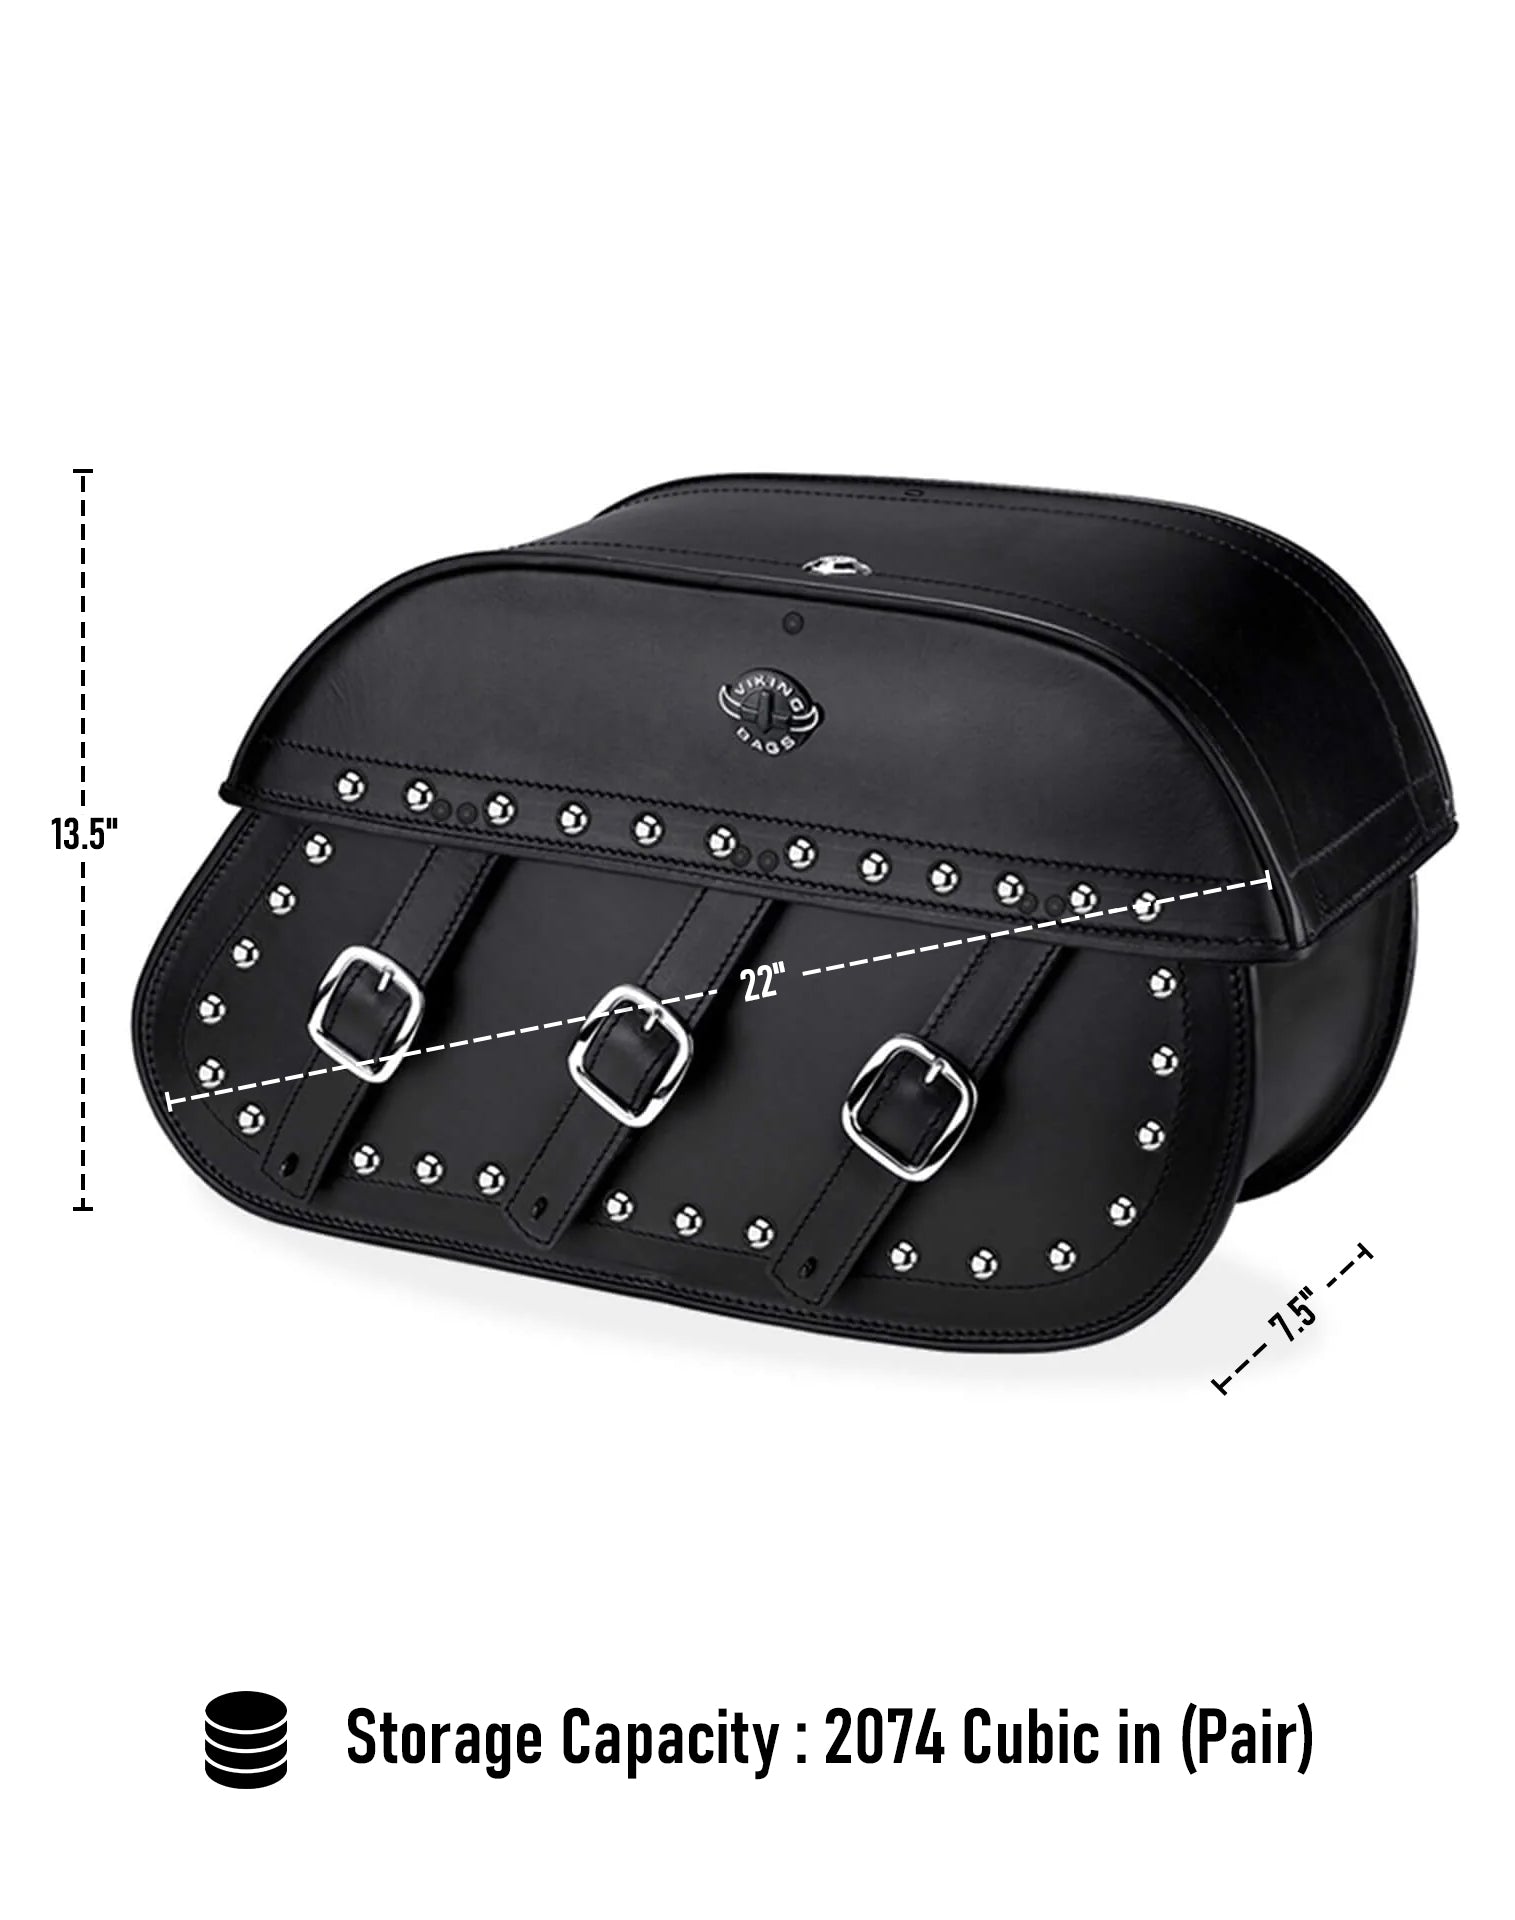 Viking Trianon Extra Large Victory Gunner Studded Leather Motorcycle Saddlebags Can Store Your Ridings Gears